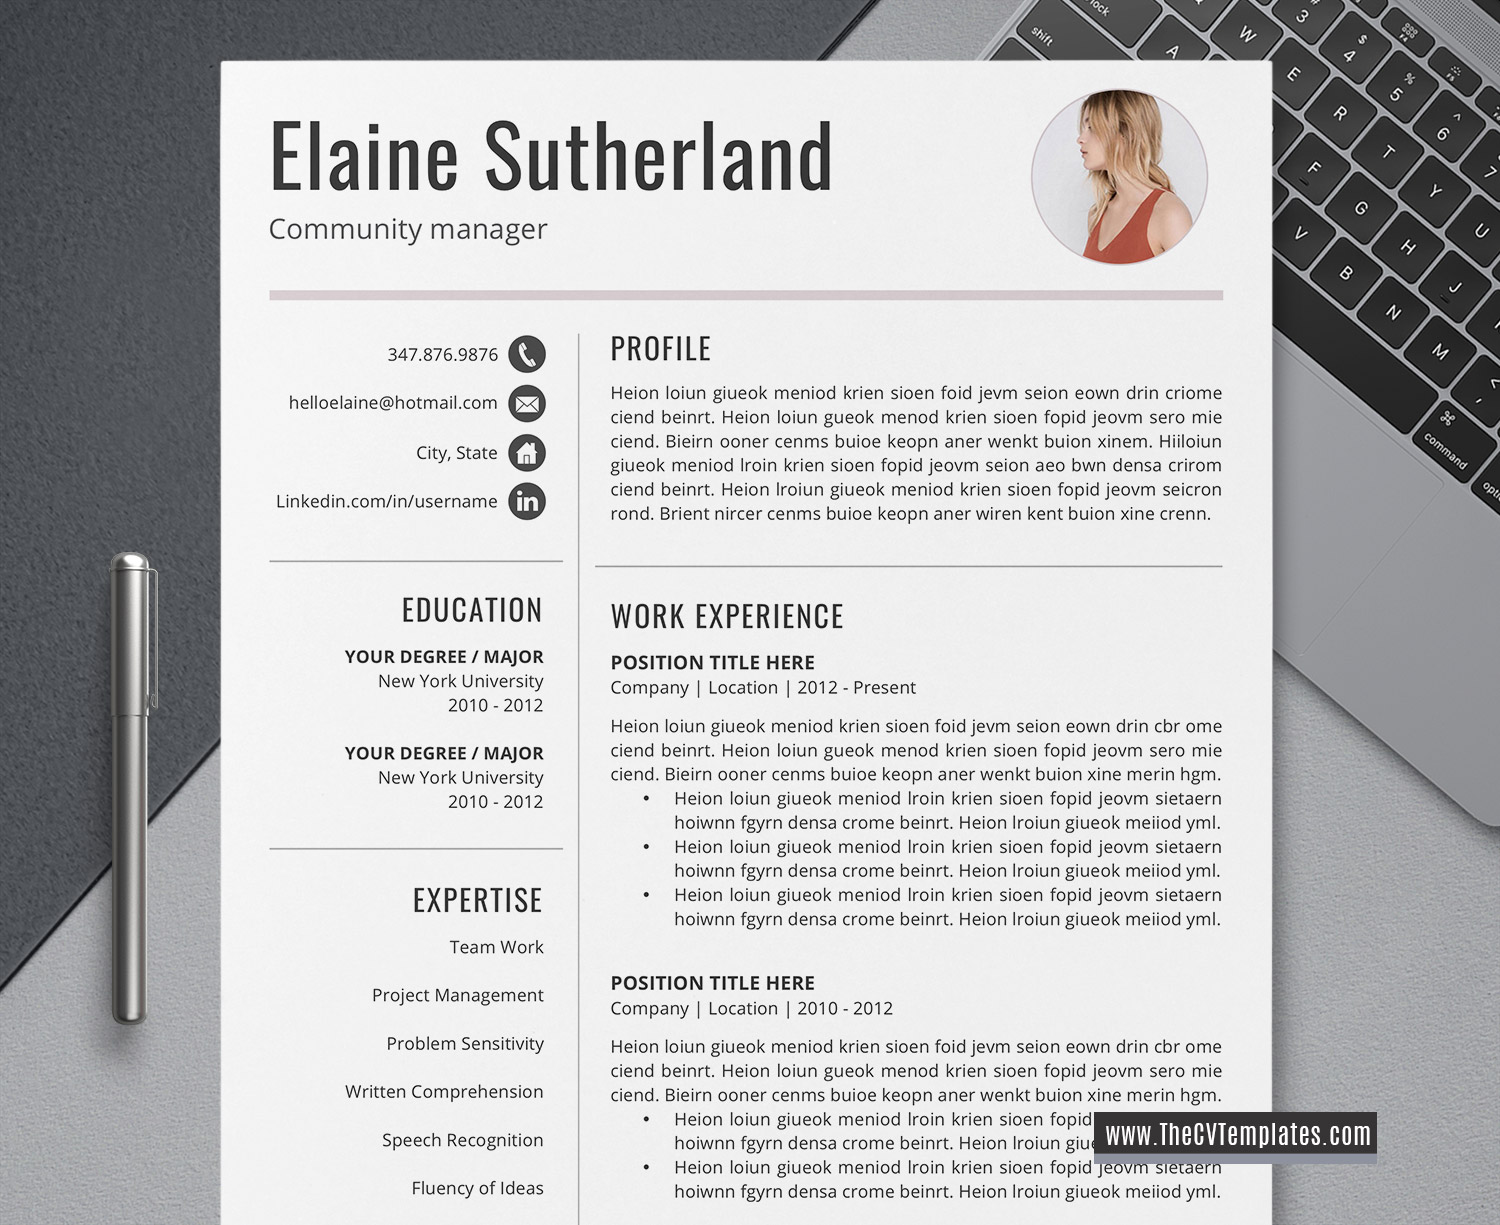 Editable Resume from www.thecvtemplates.com